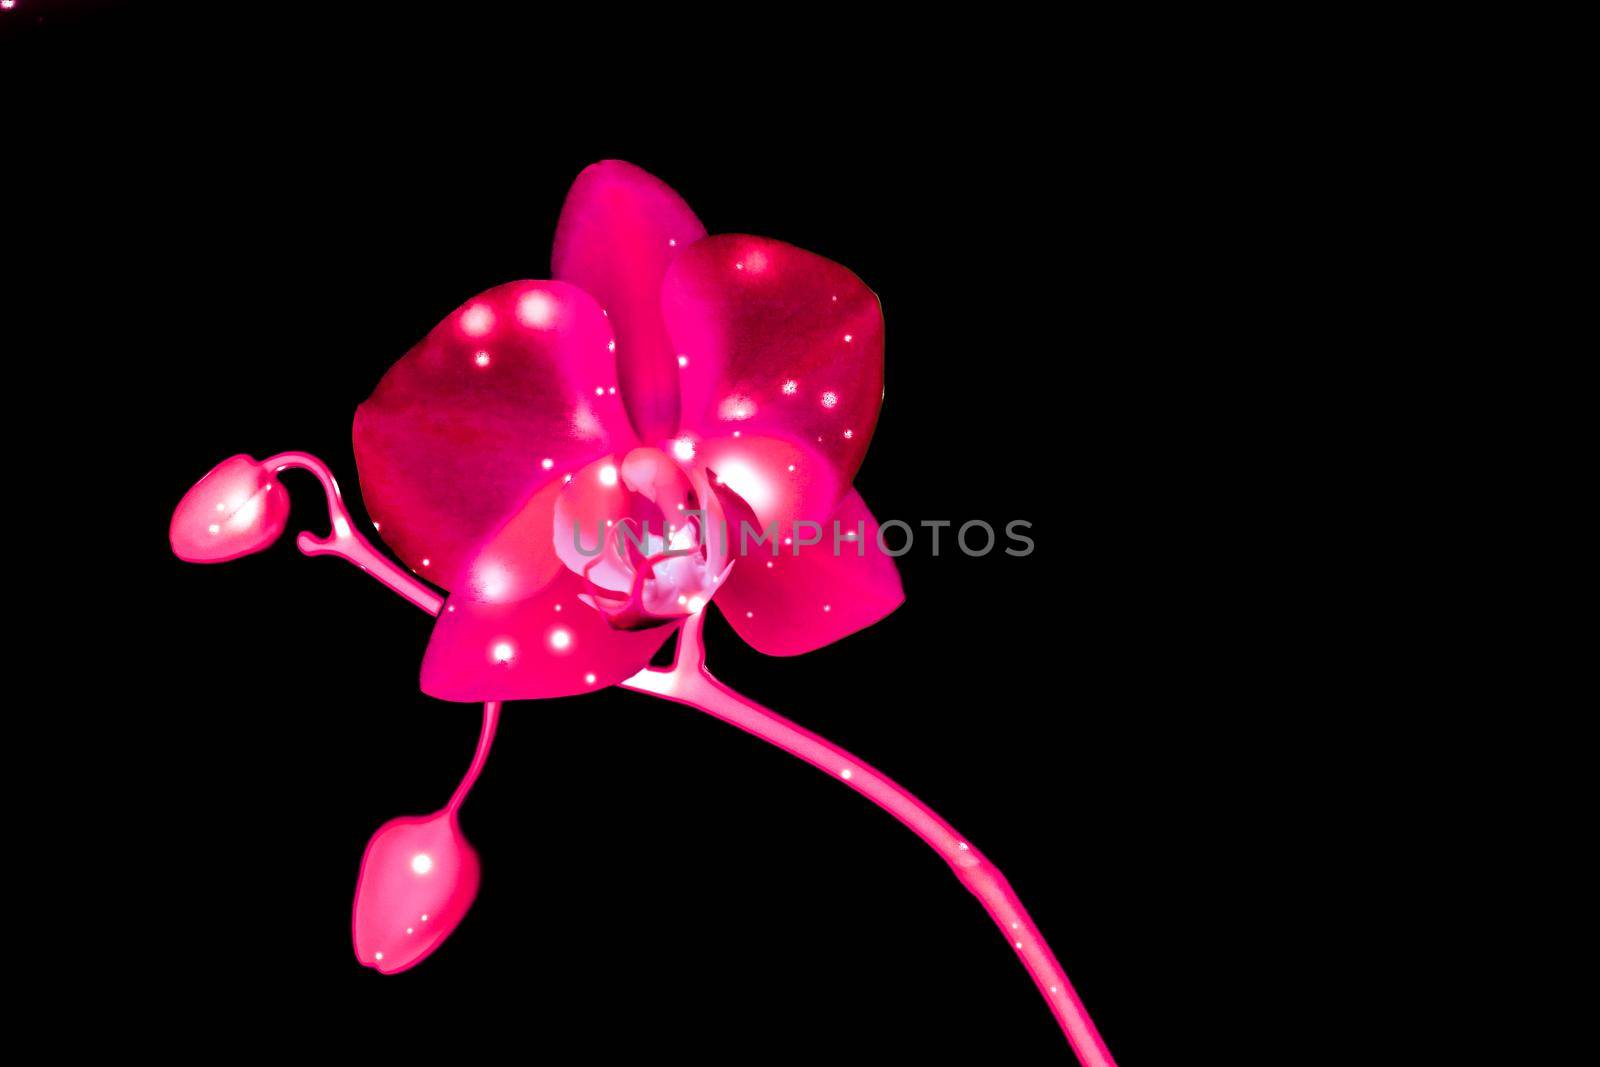 Orchid flower in bloom, abstract floral art background by Anneleven